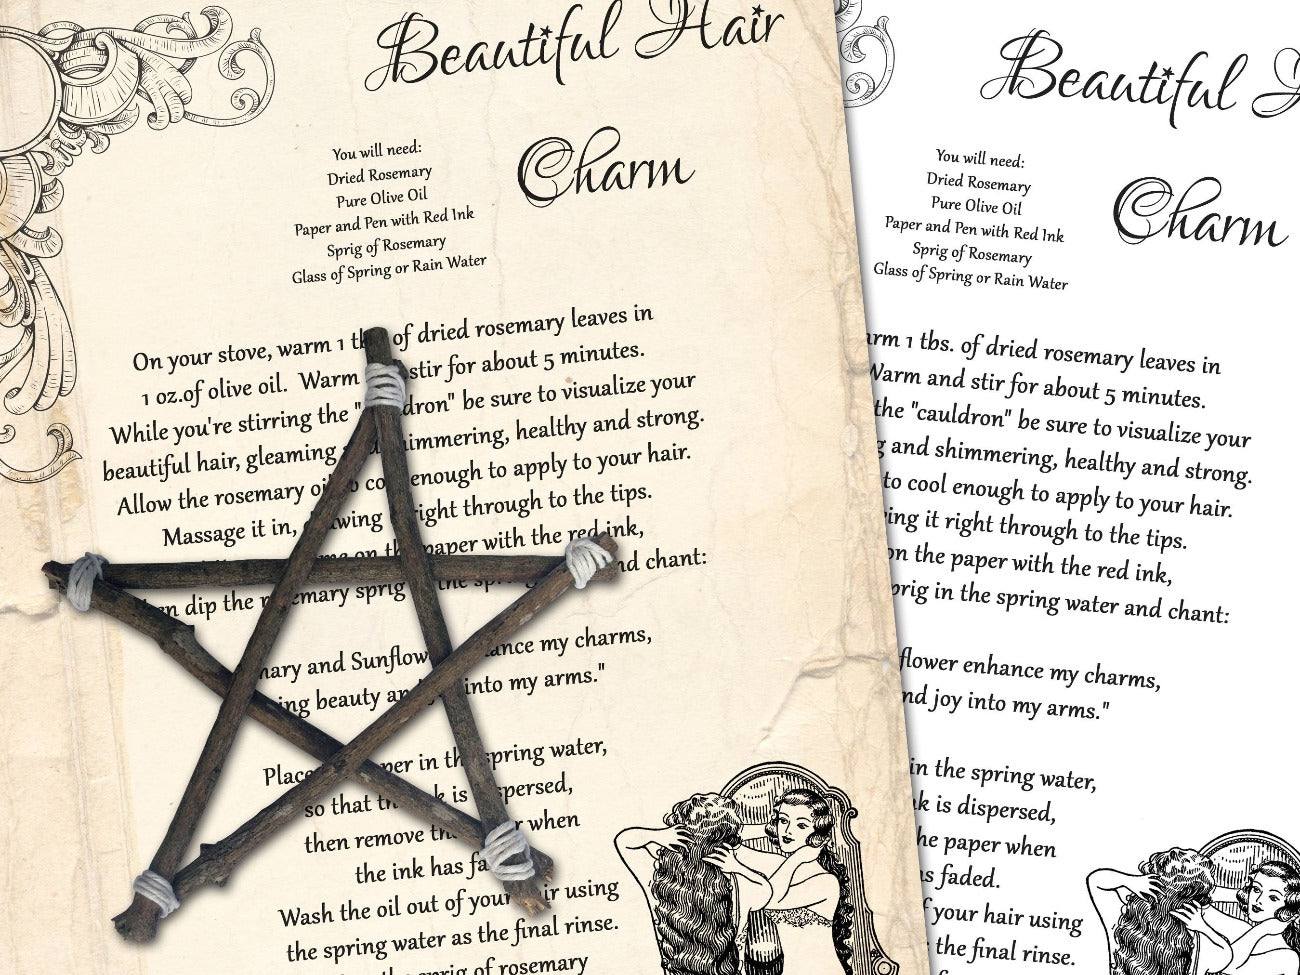 BEAUTIFUL HAIR CHARM, Grow Out your Hair, Magic Potion, Kitchen Witch, long strong hair growth, Printable page for your Spellbook - Morgana Magick Spell